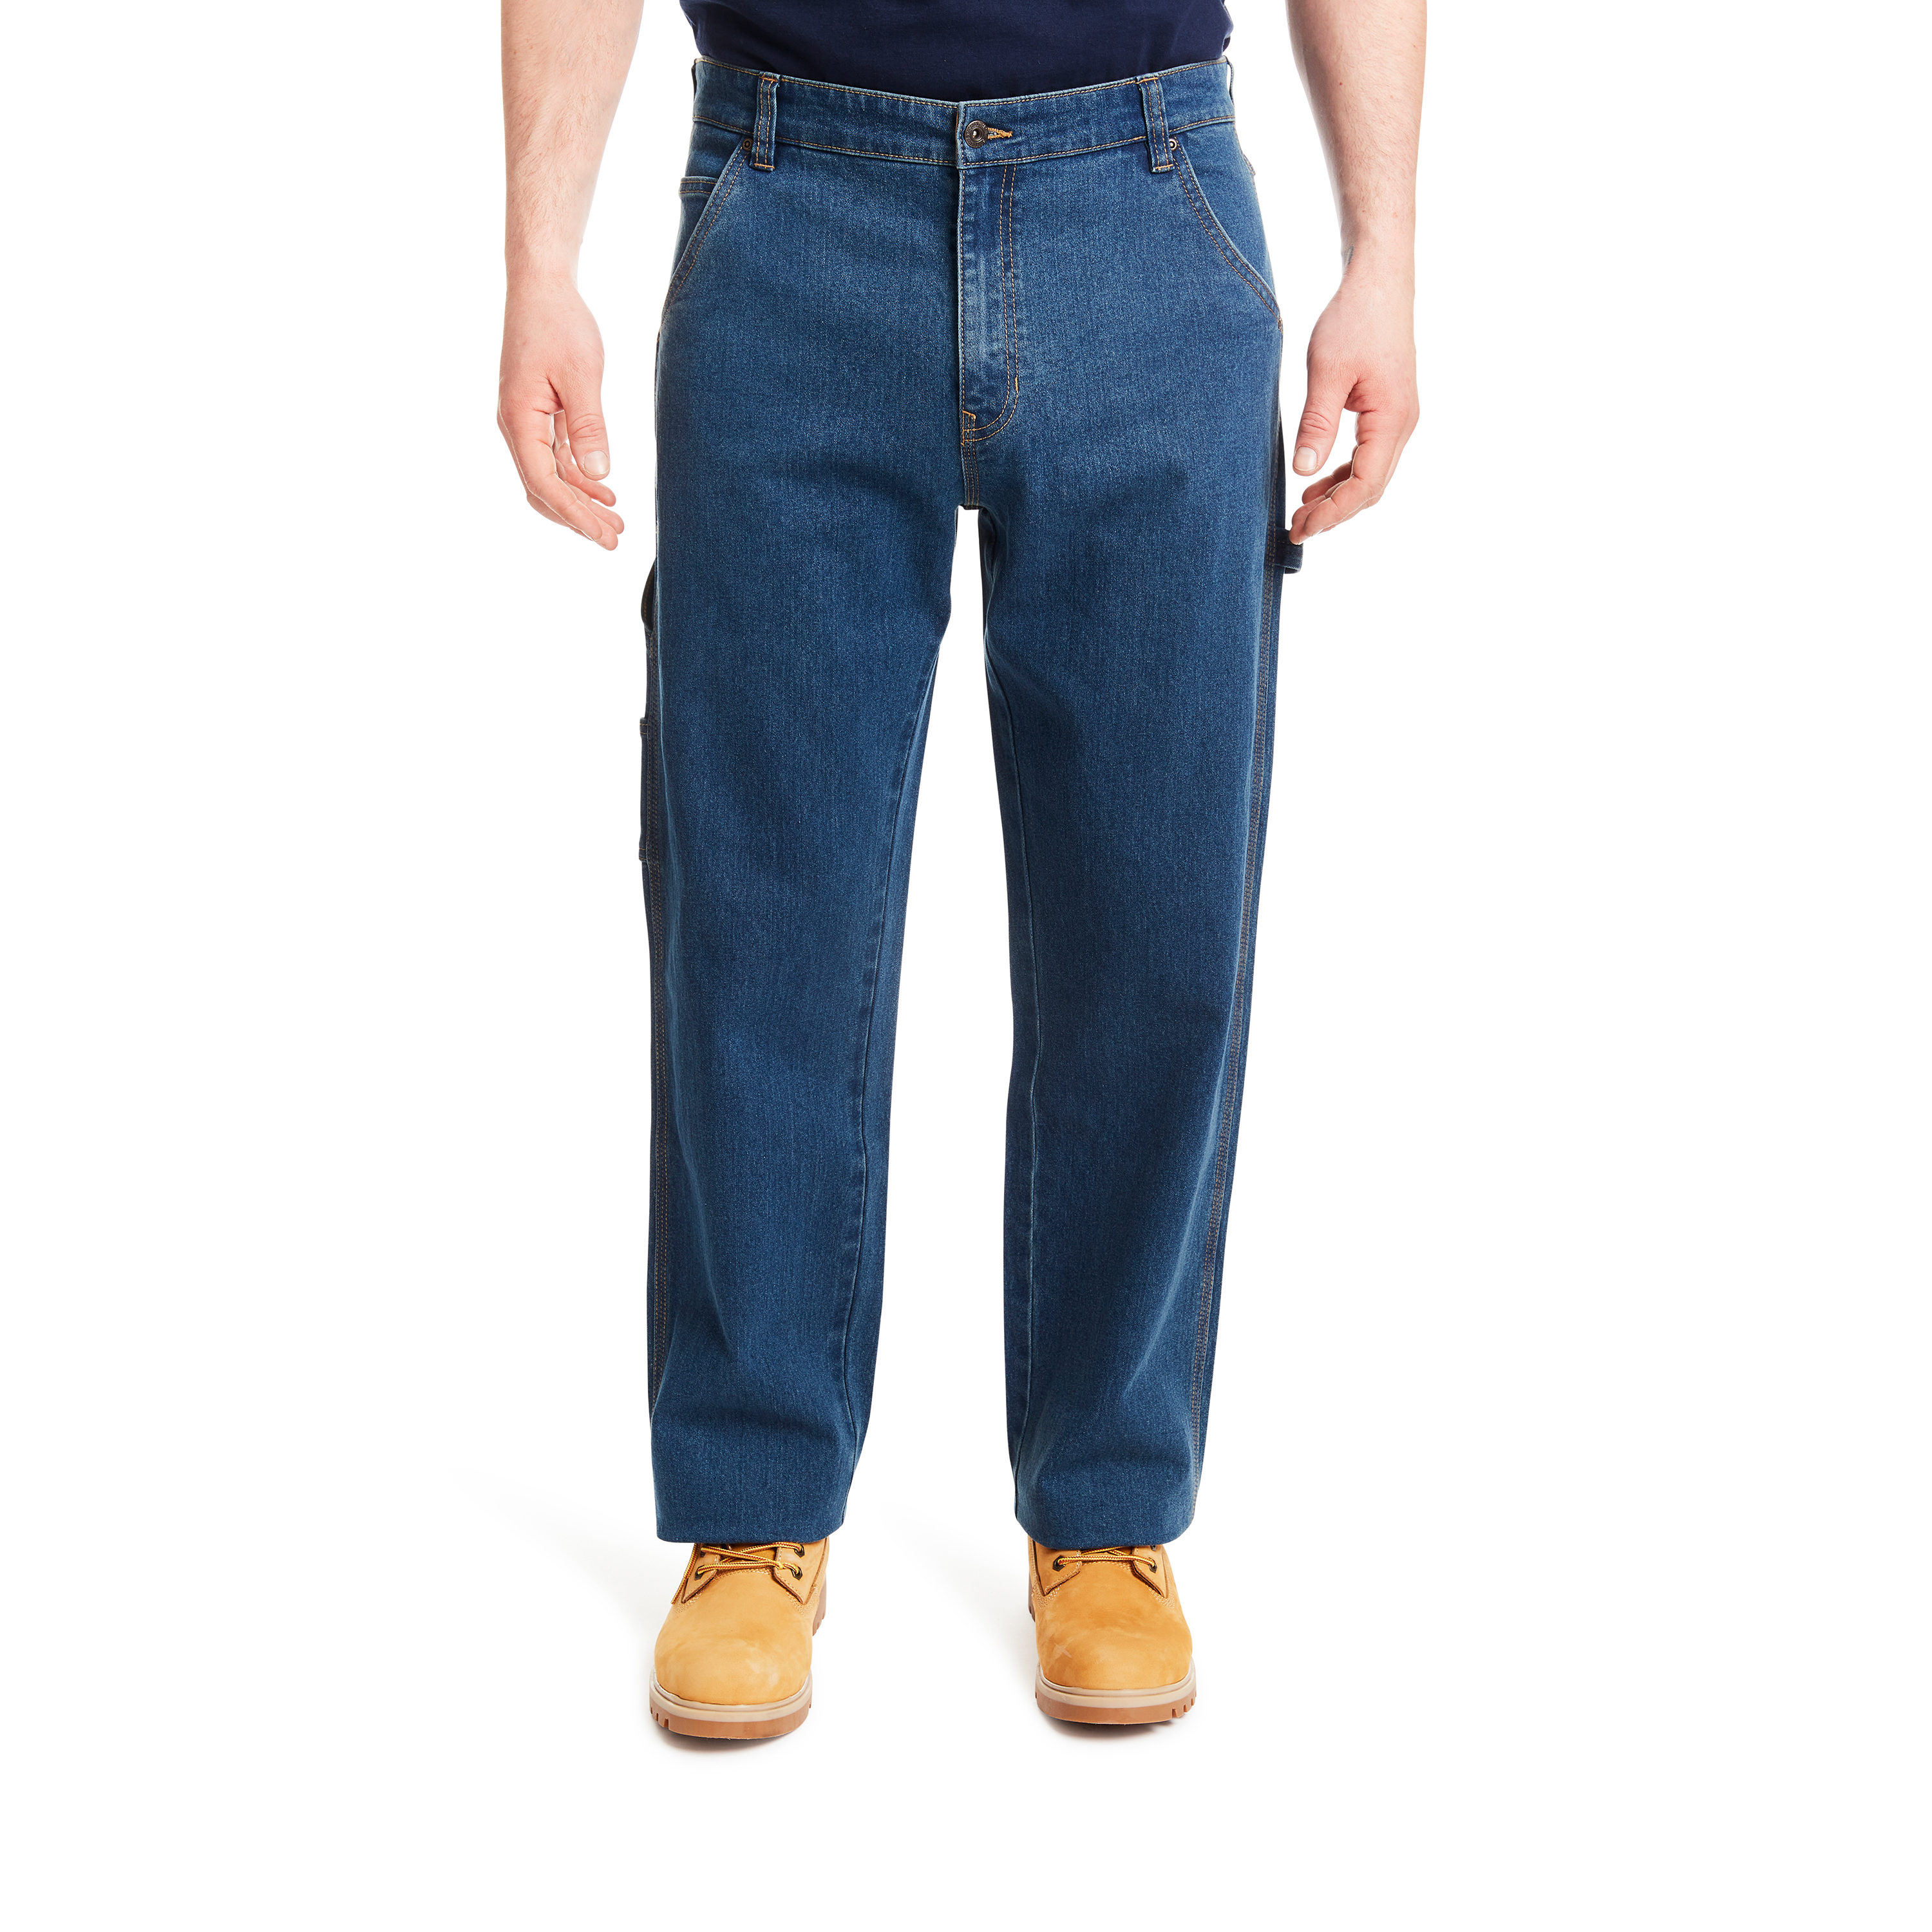 Denim & Workwear | Workwear vintage, Denim workwear, Workwear jeans